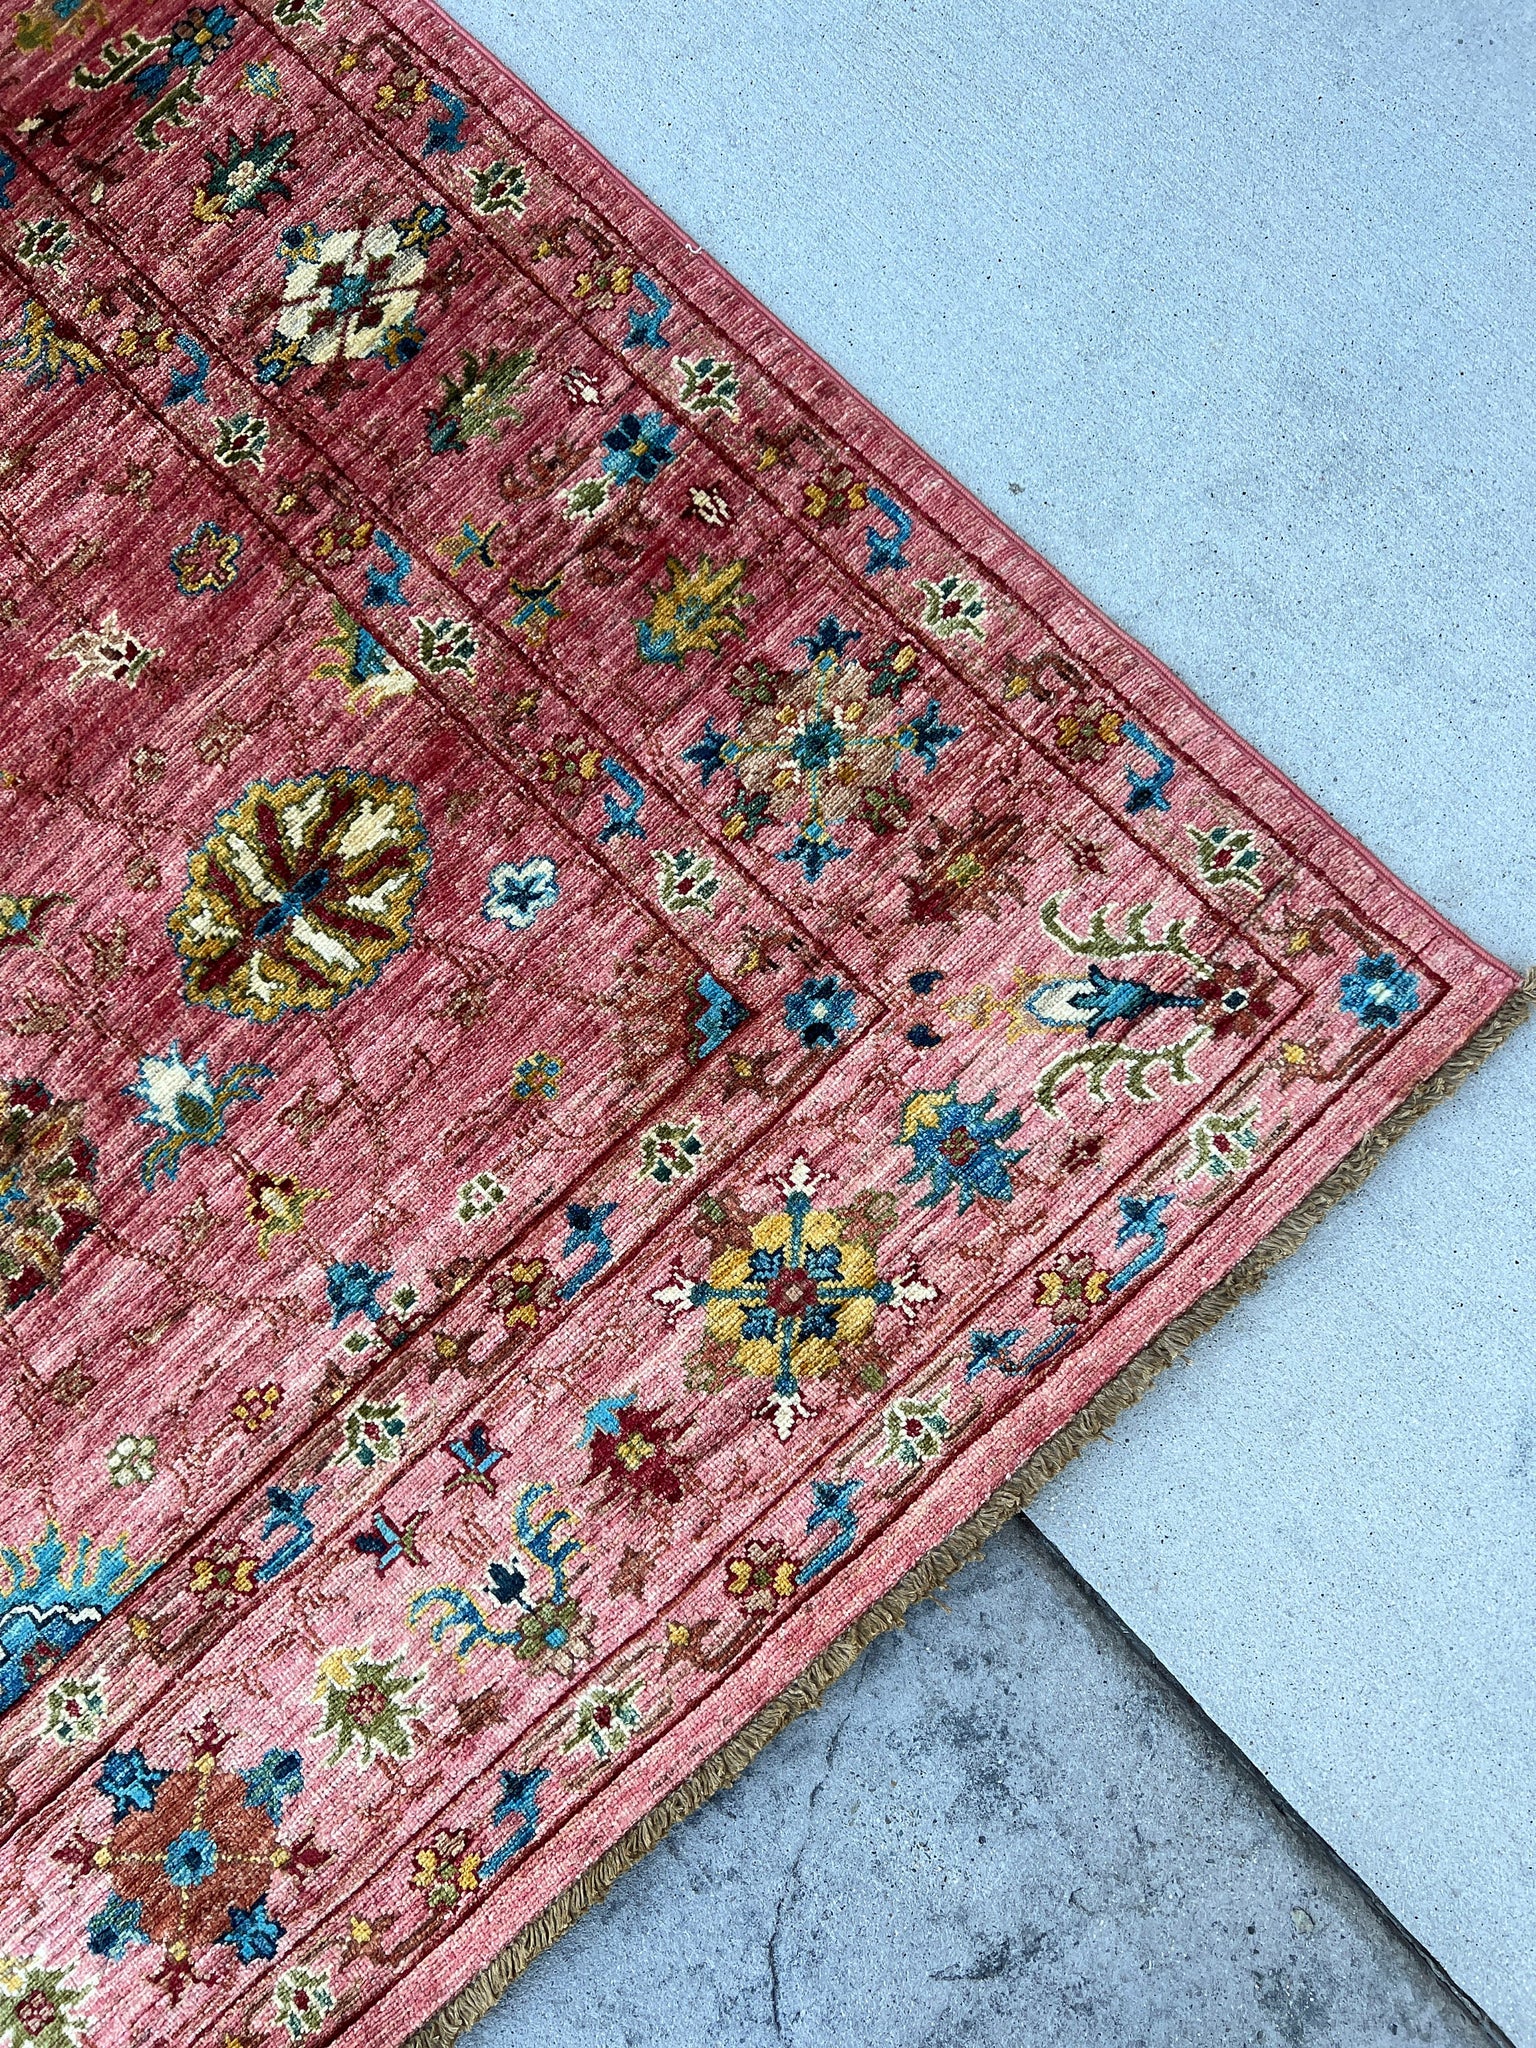 6x8 (180x245) Hand Knotted Handmade Afghan Rug | Blush Rose Pink Red Teal Chocolate Caramel Brown Caramel Ivory Cream Beige | Tribal Floral